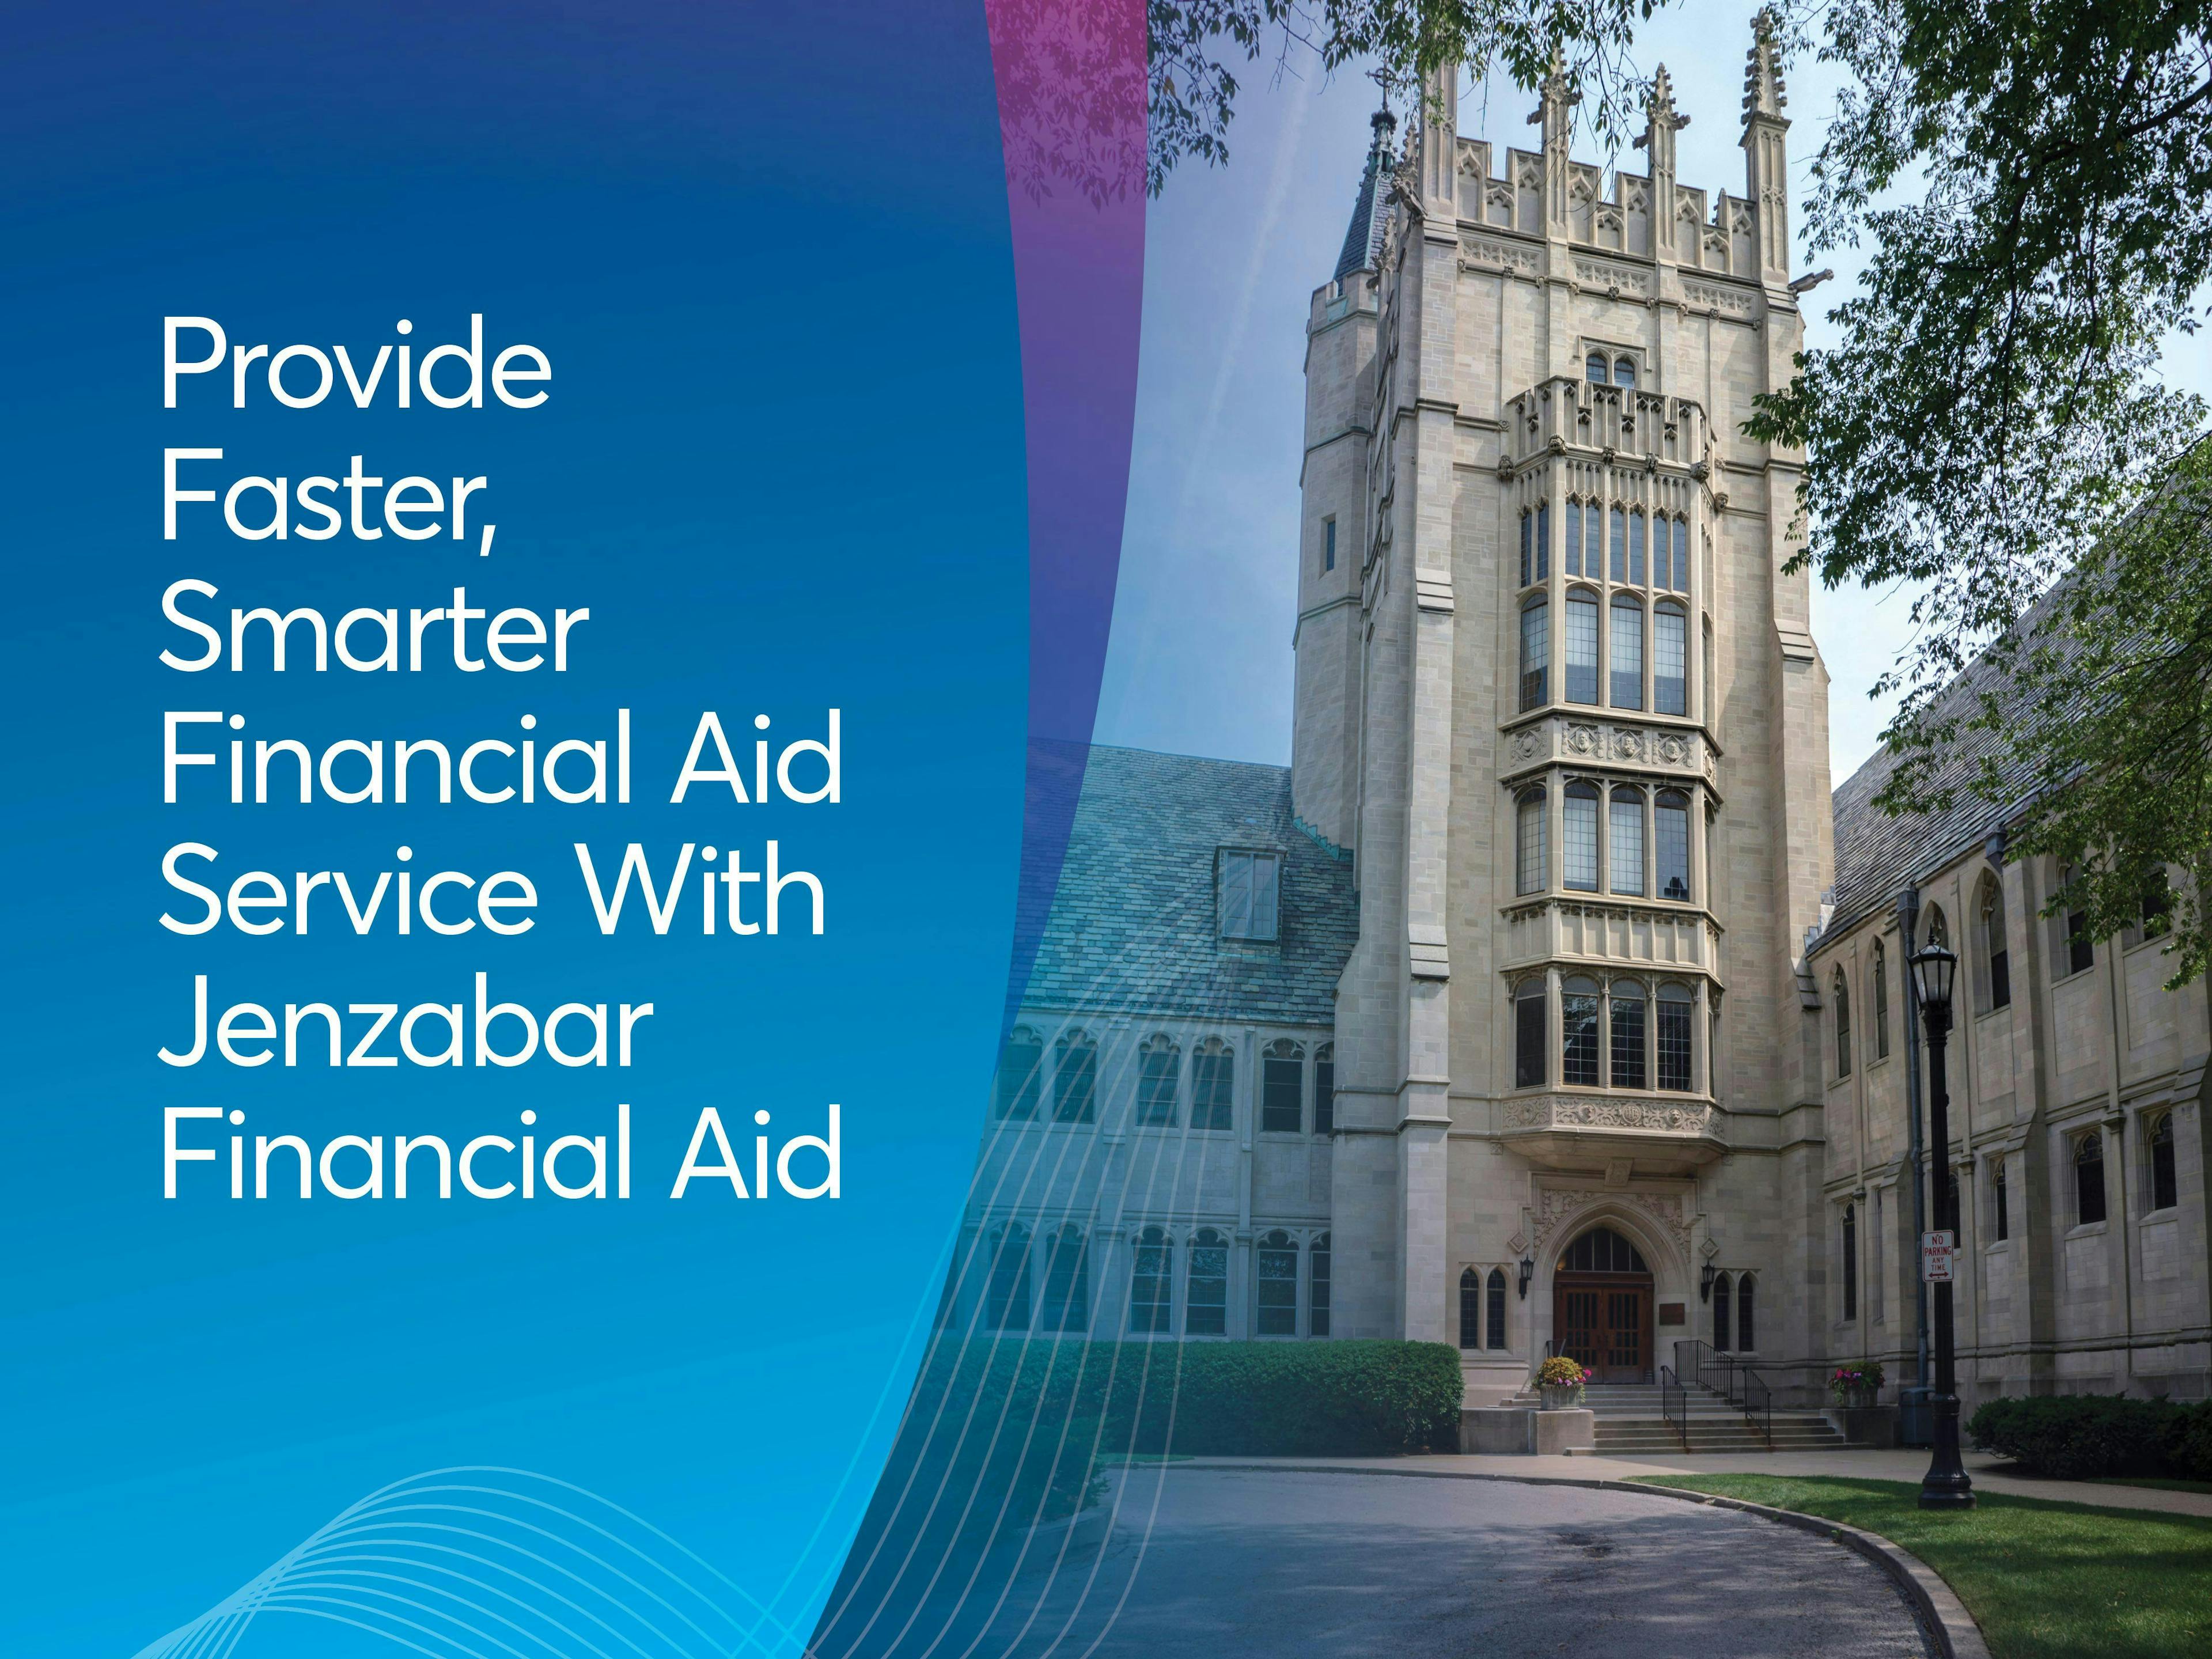 Provide Faster, Smarter Financial Aid Service With Jenzabar Financial Aid